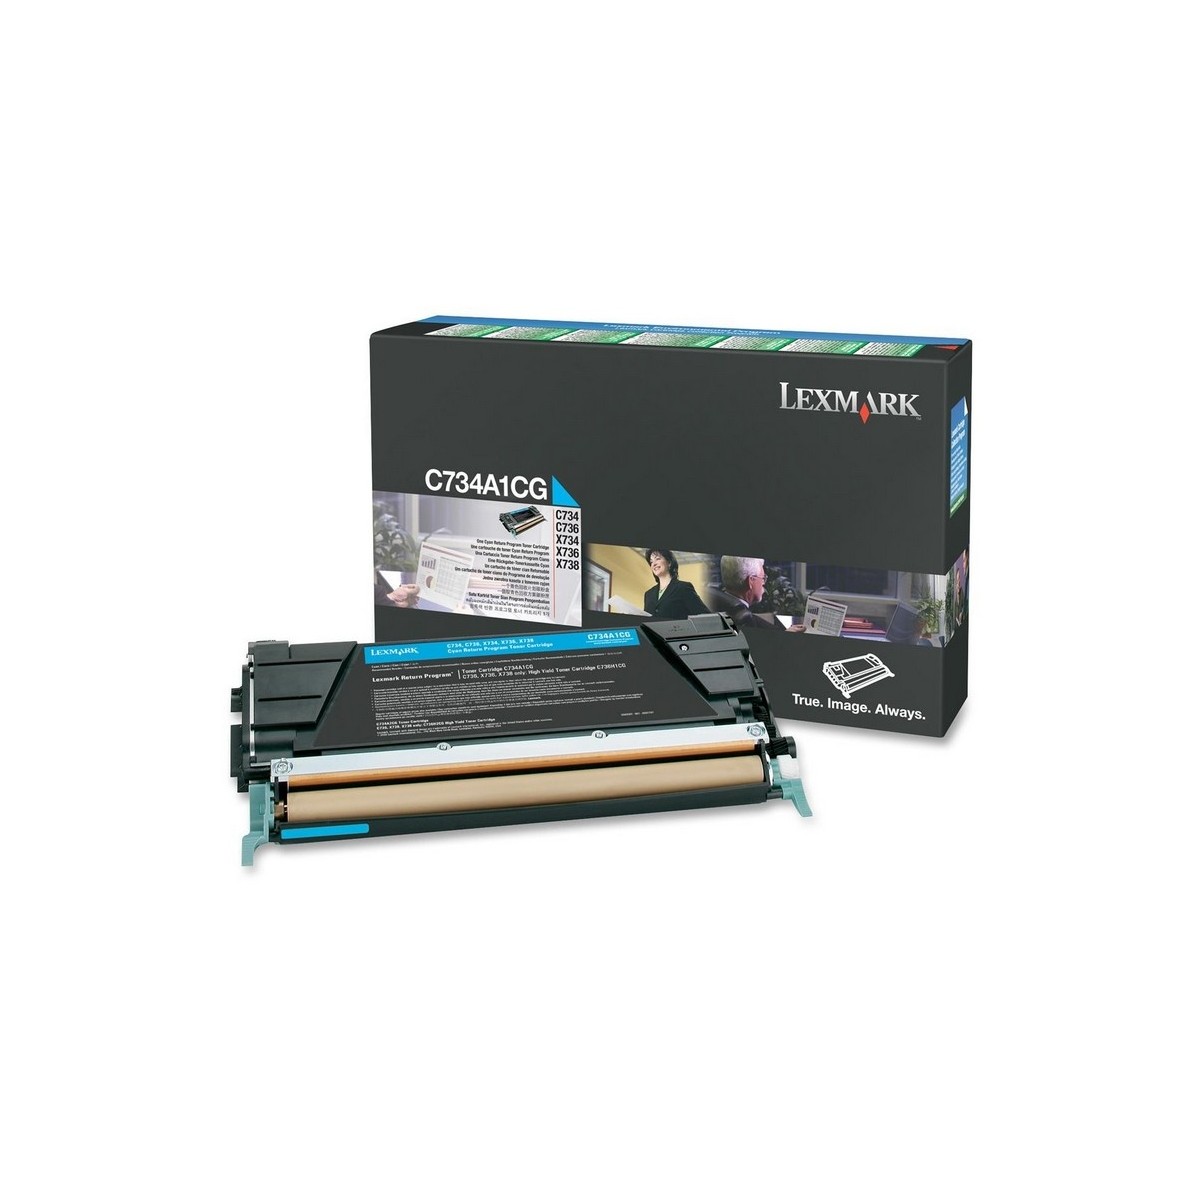 Lexmark C734A1CG - 6000 pages - Cyan - 1 pc(s)